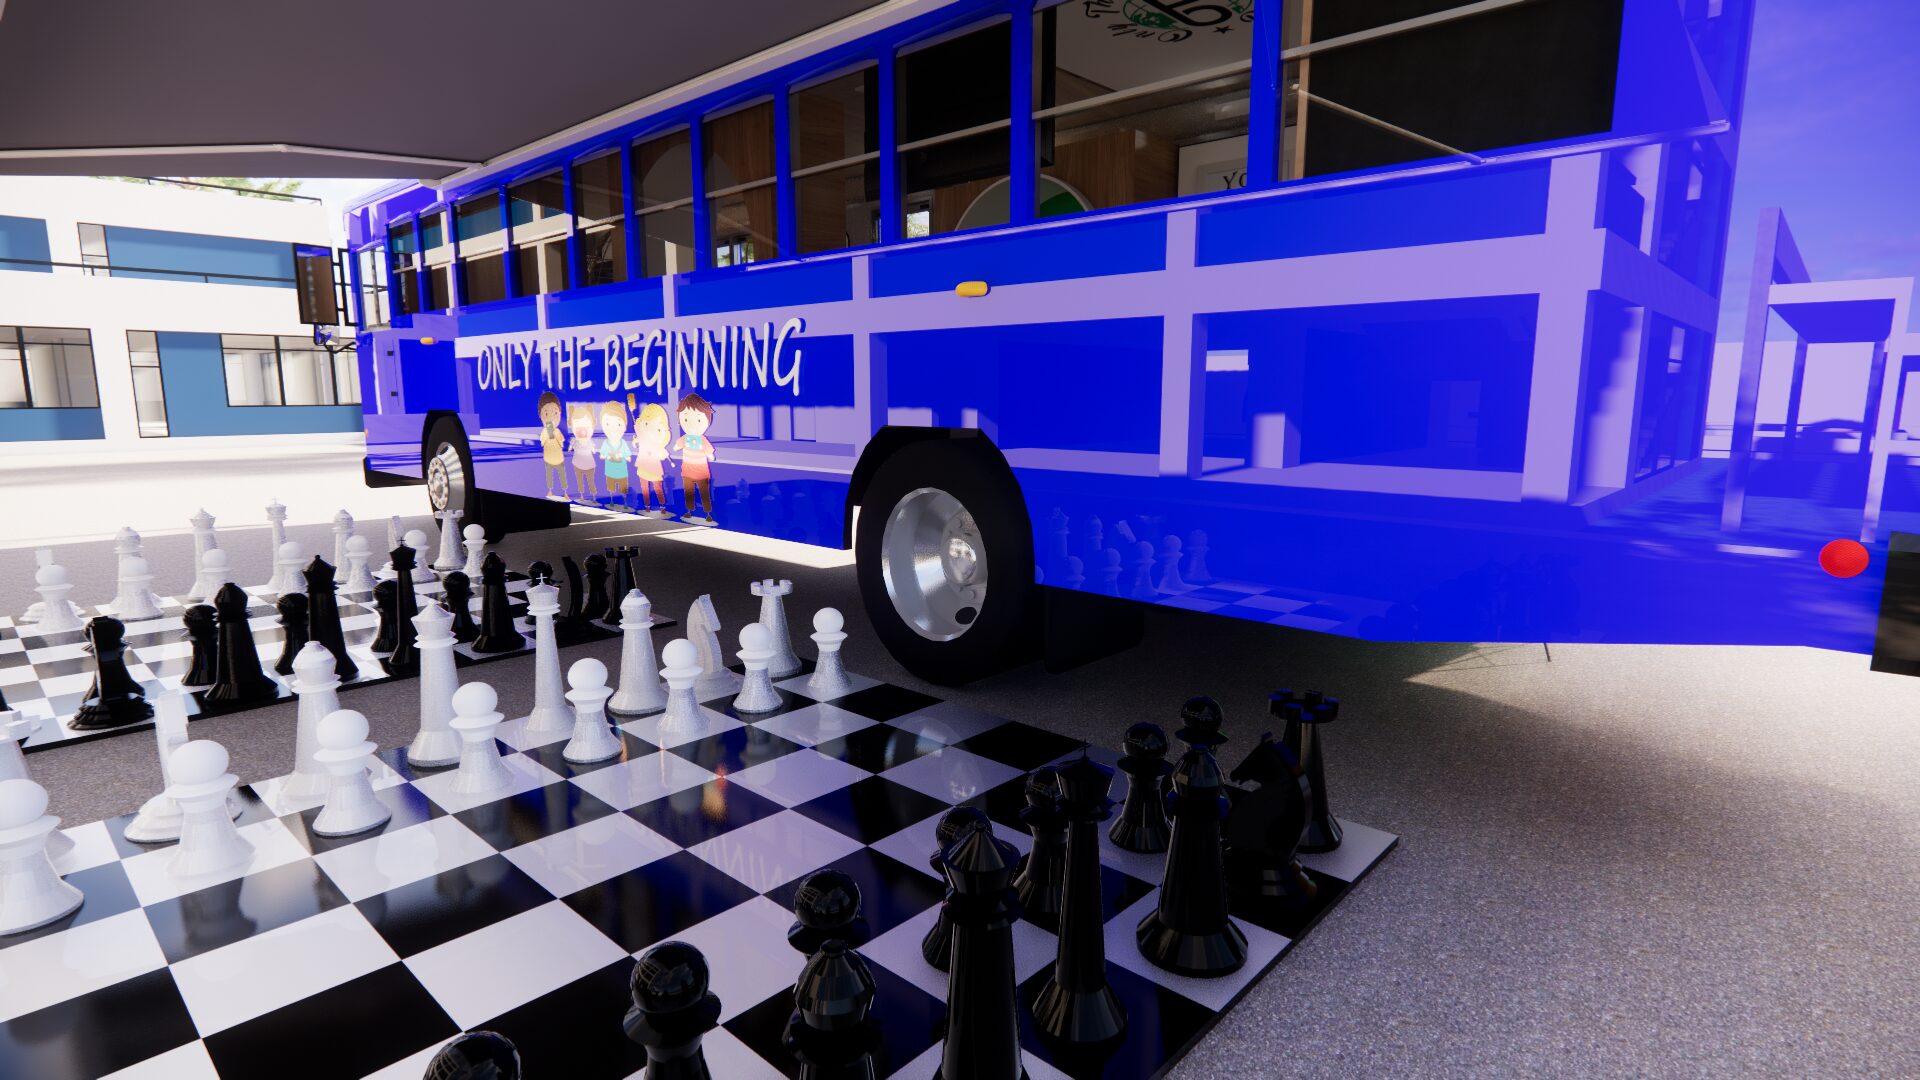 Closeup shot of blue color bus with chess board print floor